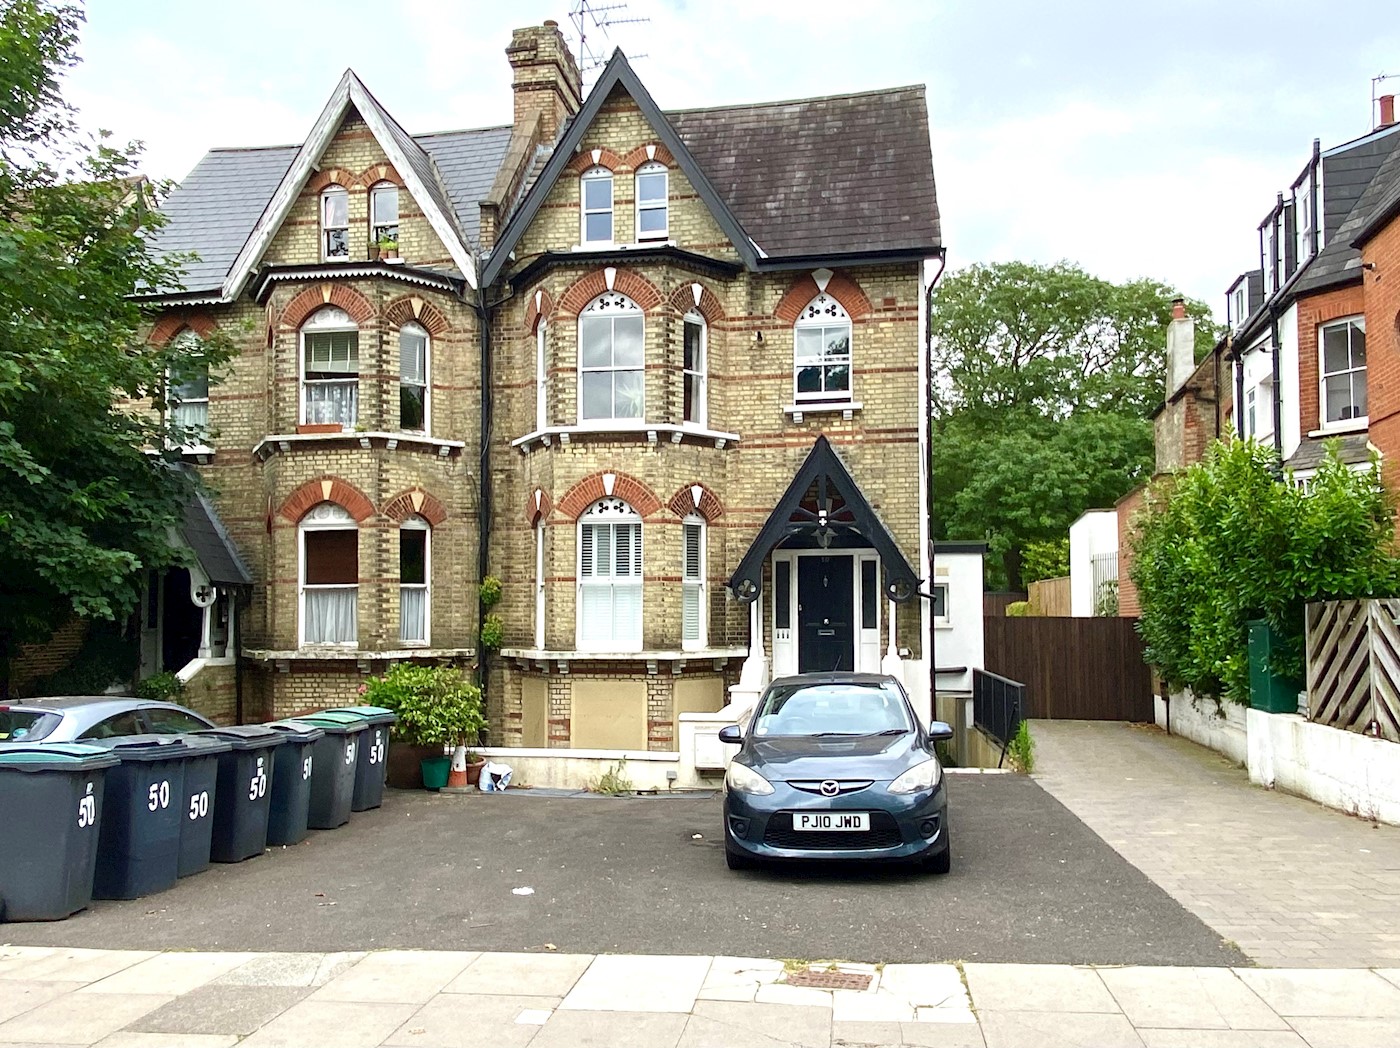 Flat 1, 50 Tetherdown, Muswell Hill, N10 1NG 1/12